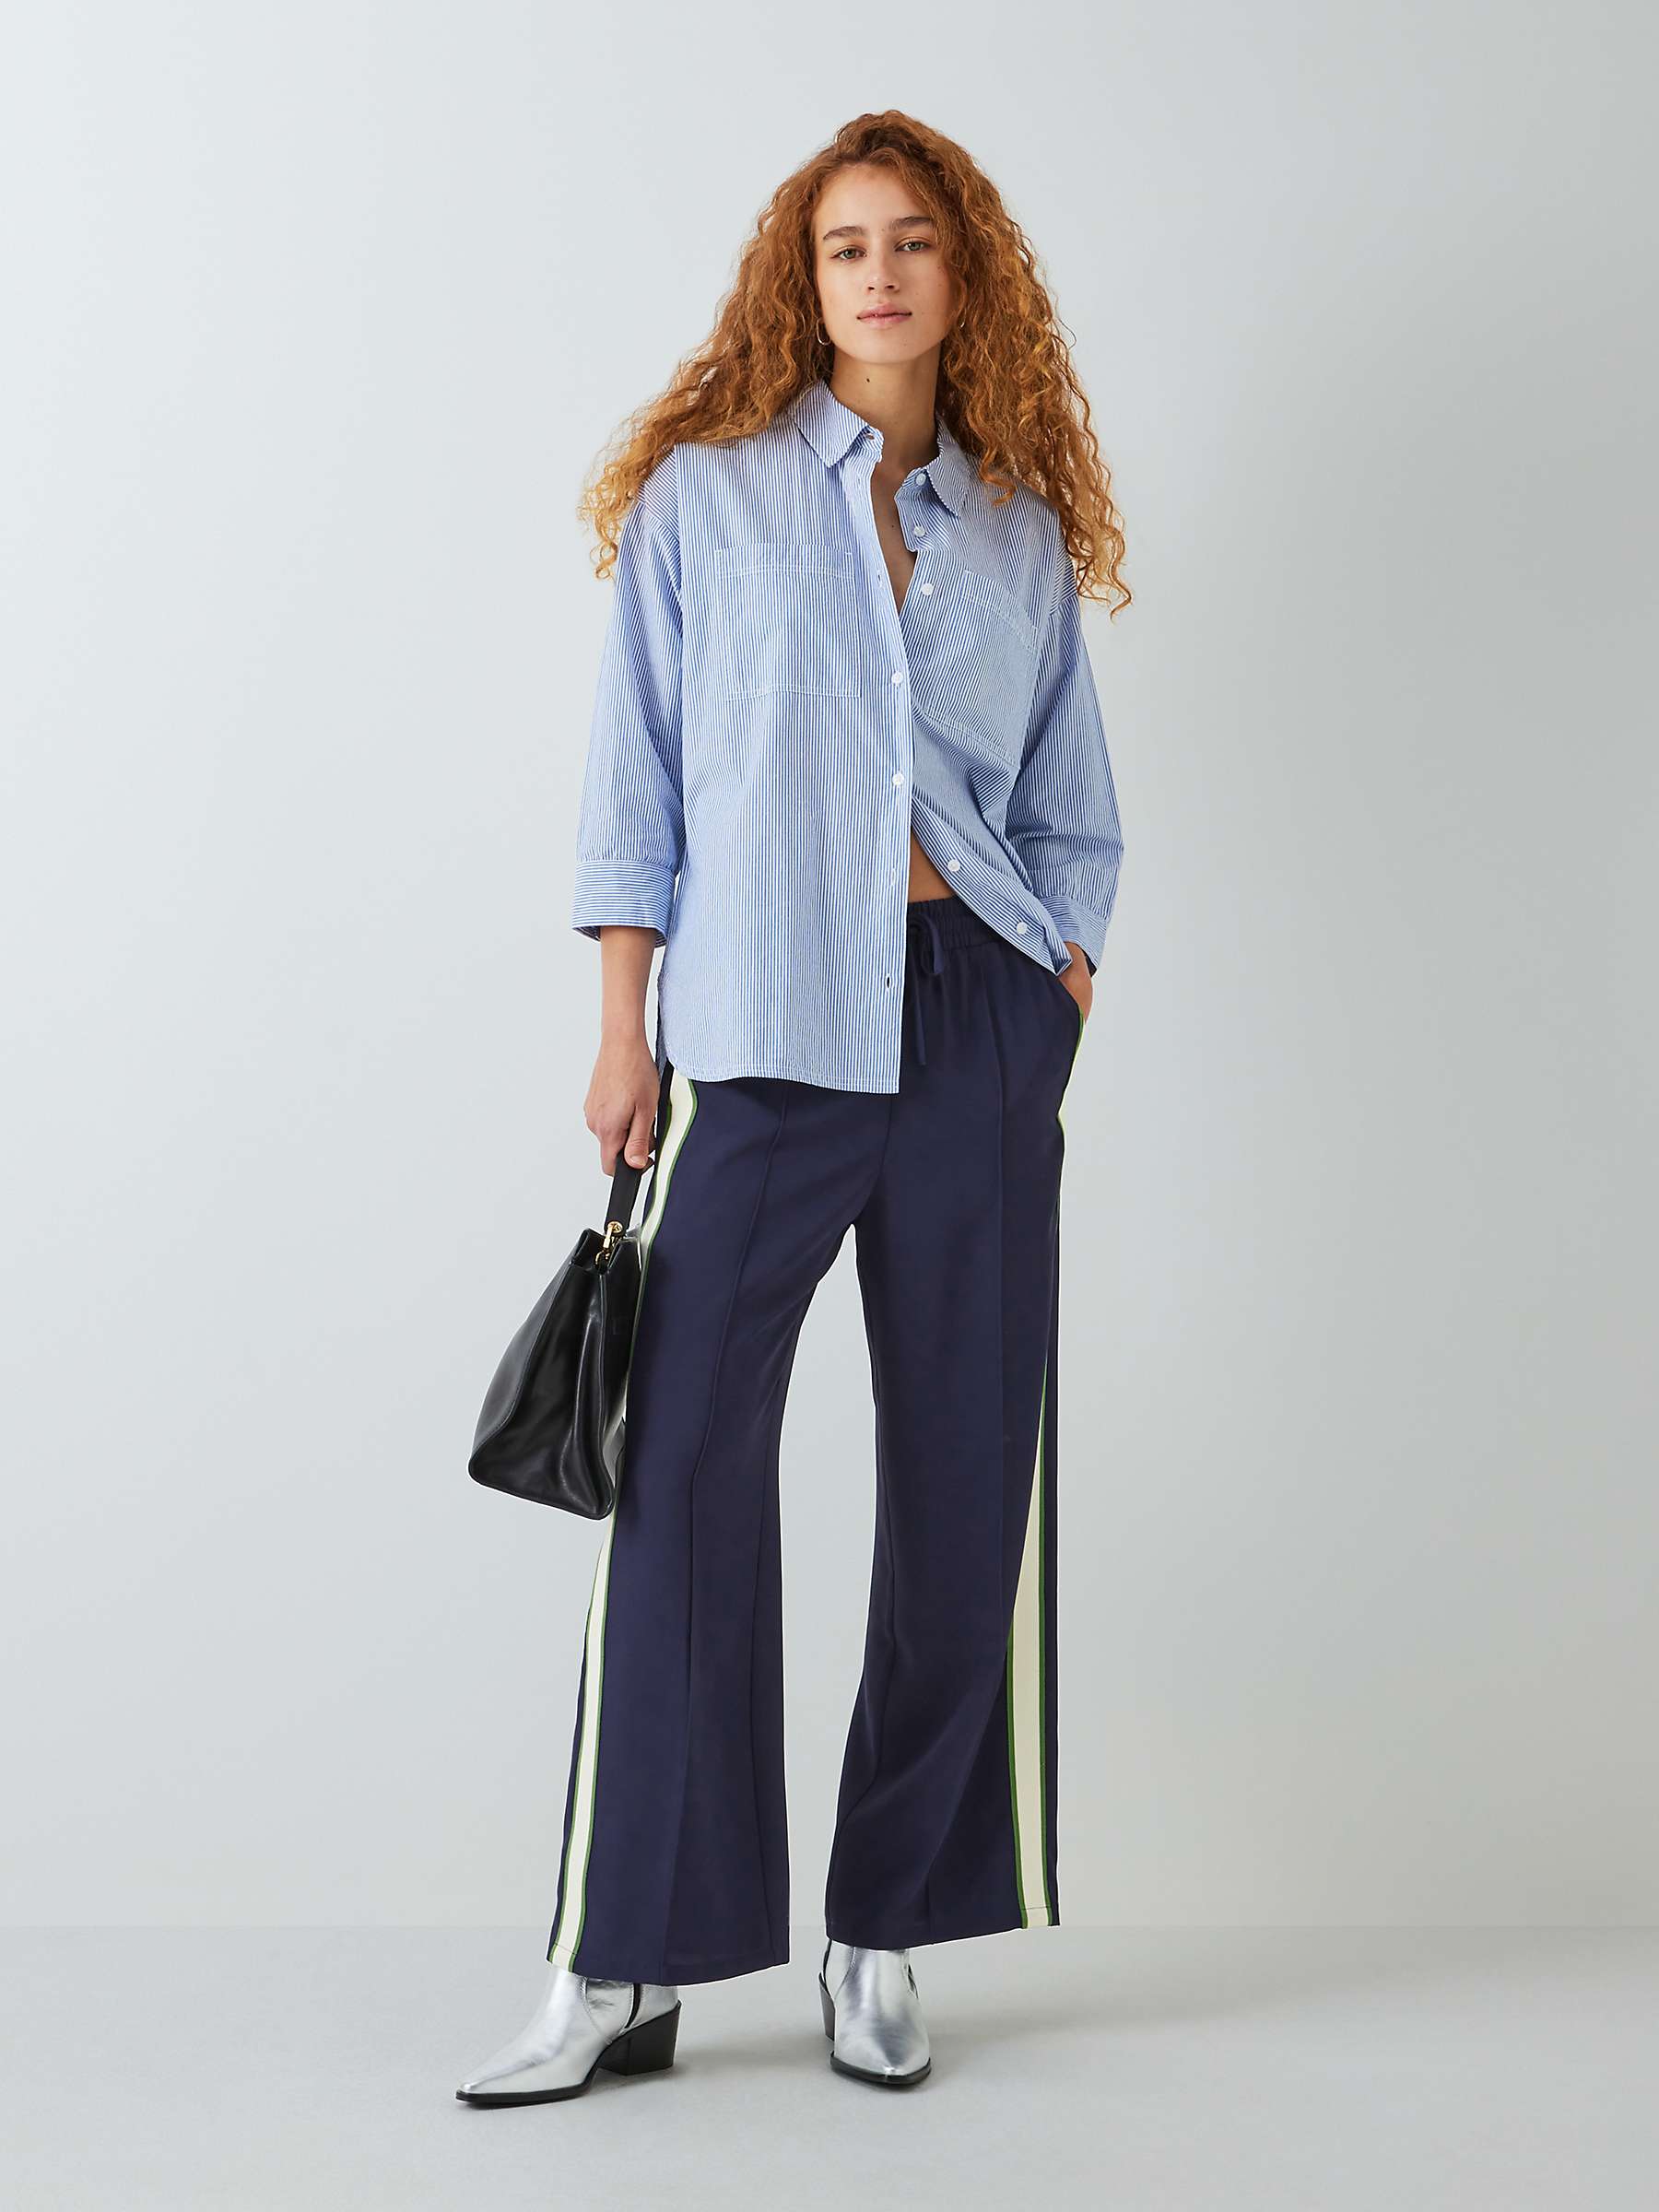 Buy John Lewis ANYDAY Side Stripe Wide Leg Trousers, Navy Online at johnlewis.com